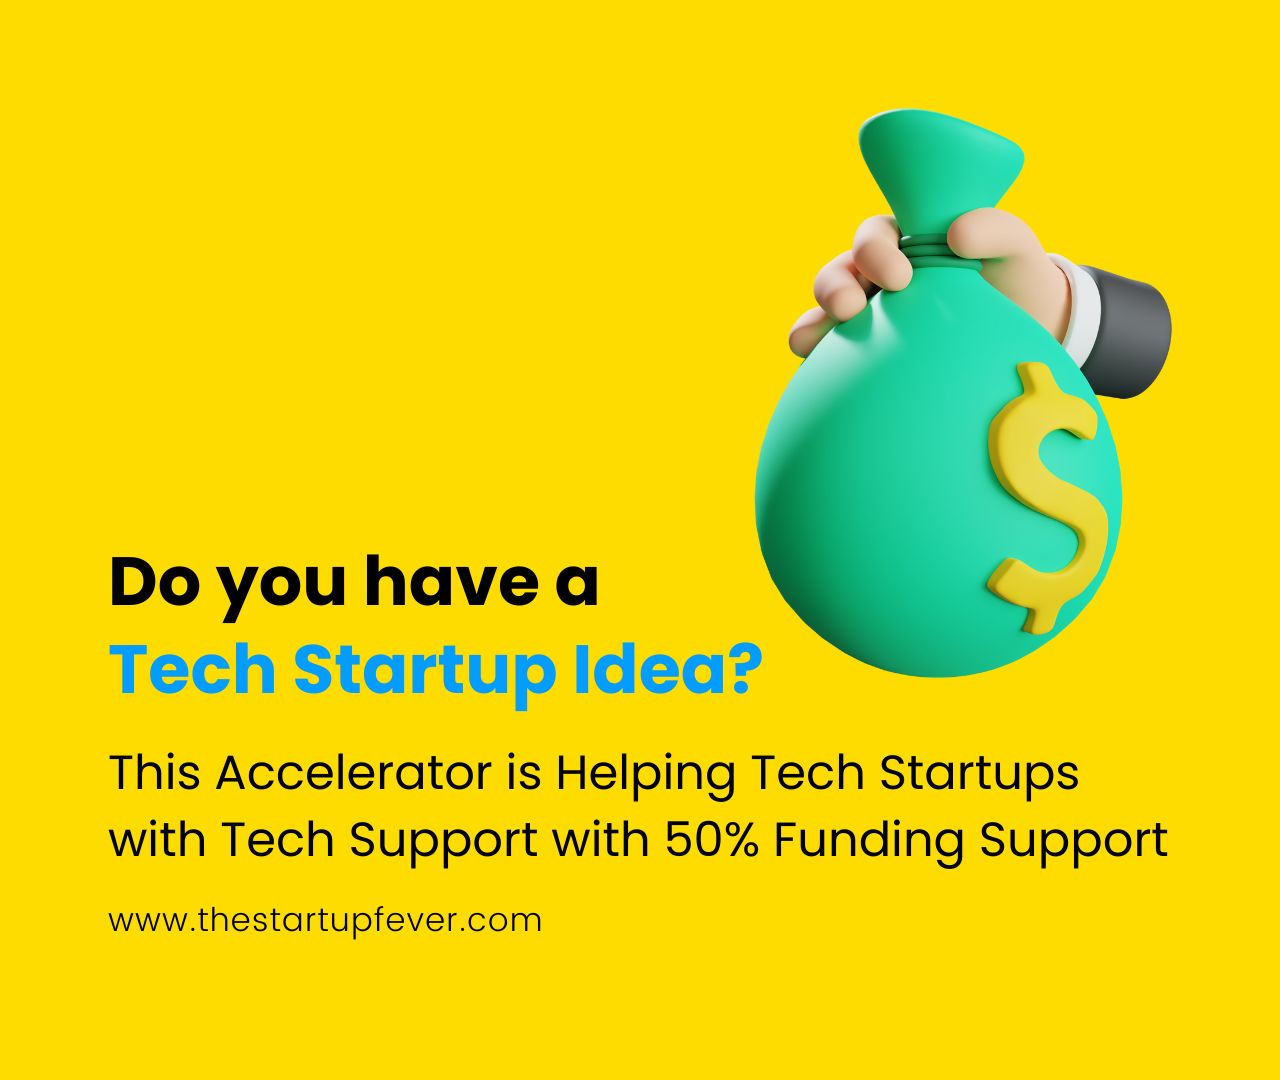 How to get funding for Tech Startup: This Accelerator is Helping Tech Startups with Tech Support with 50% Funding Support